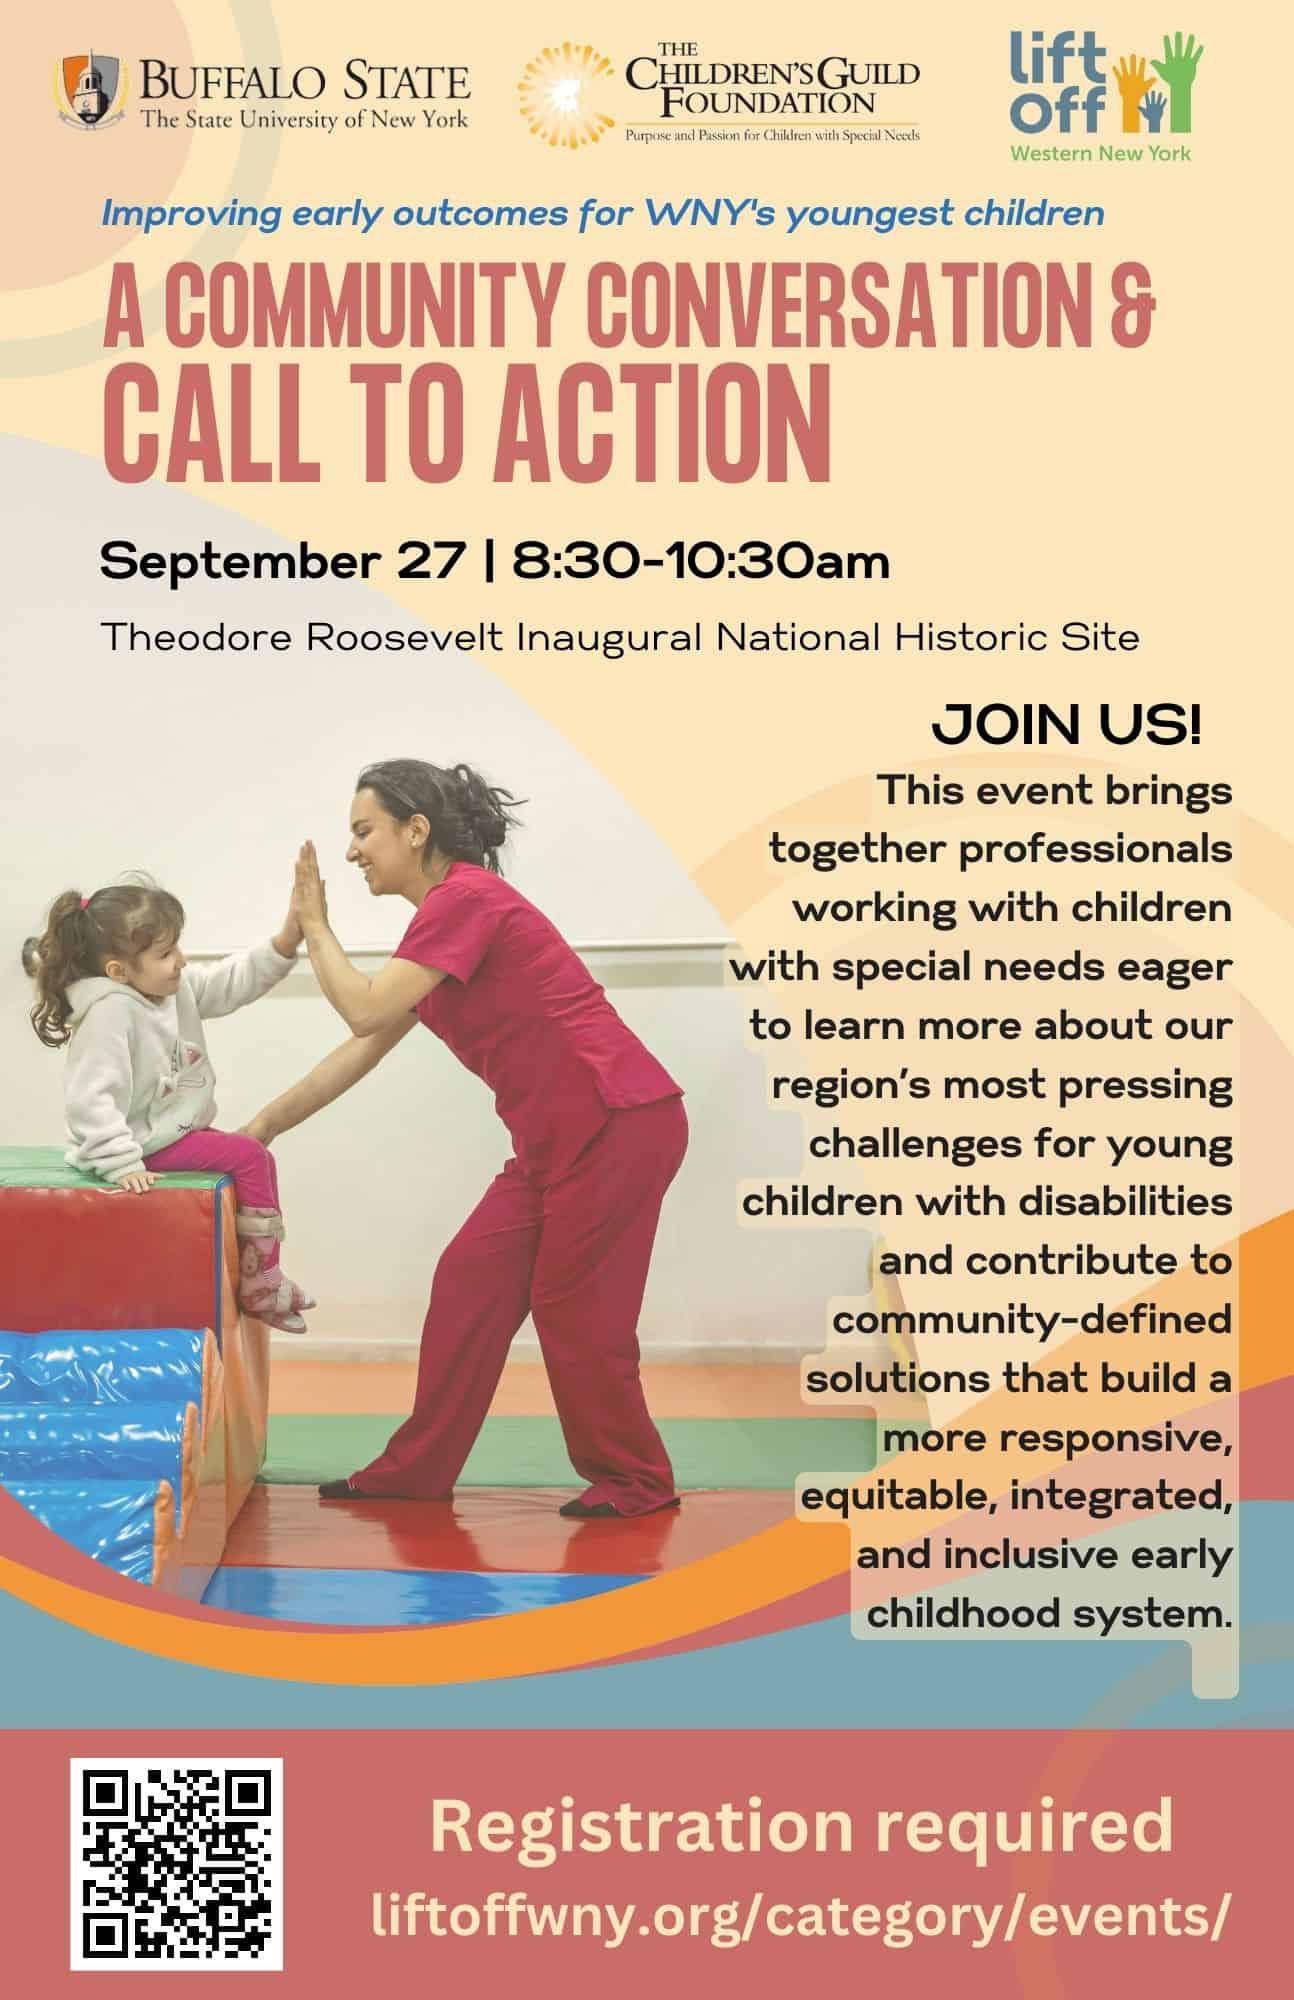 Improving early outcomes for WNY’s youngest children: A Community Conversation and Call to Action